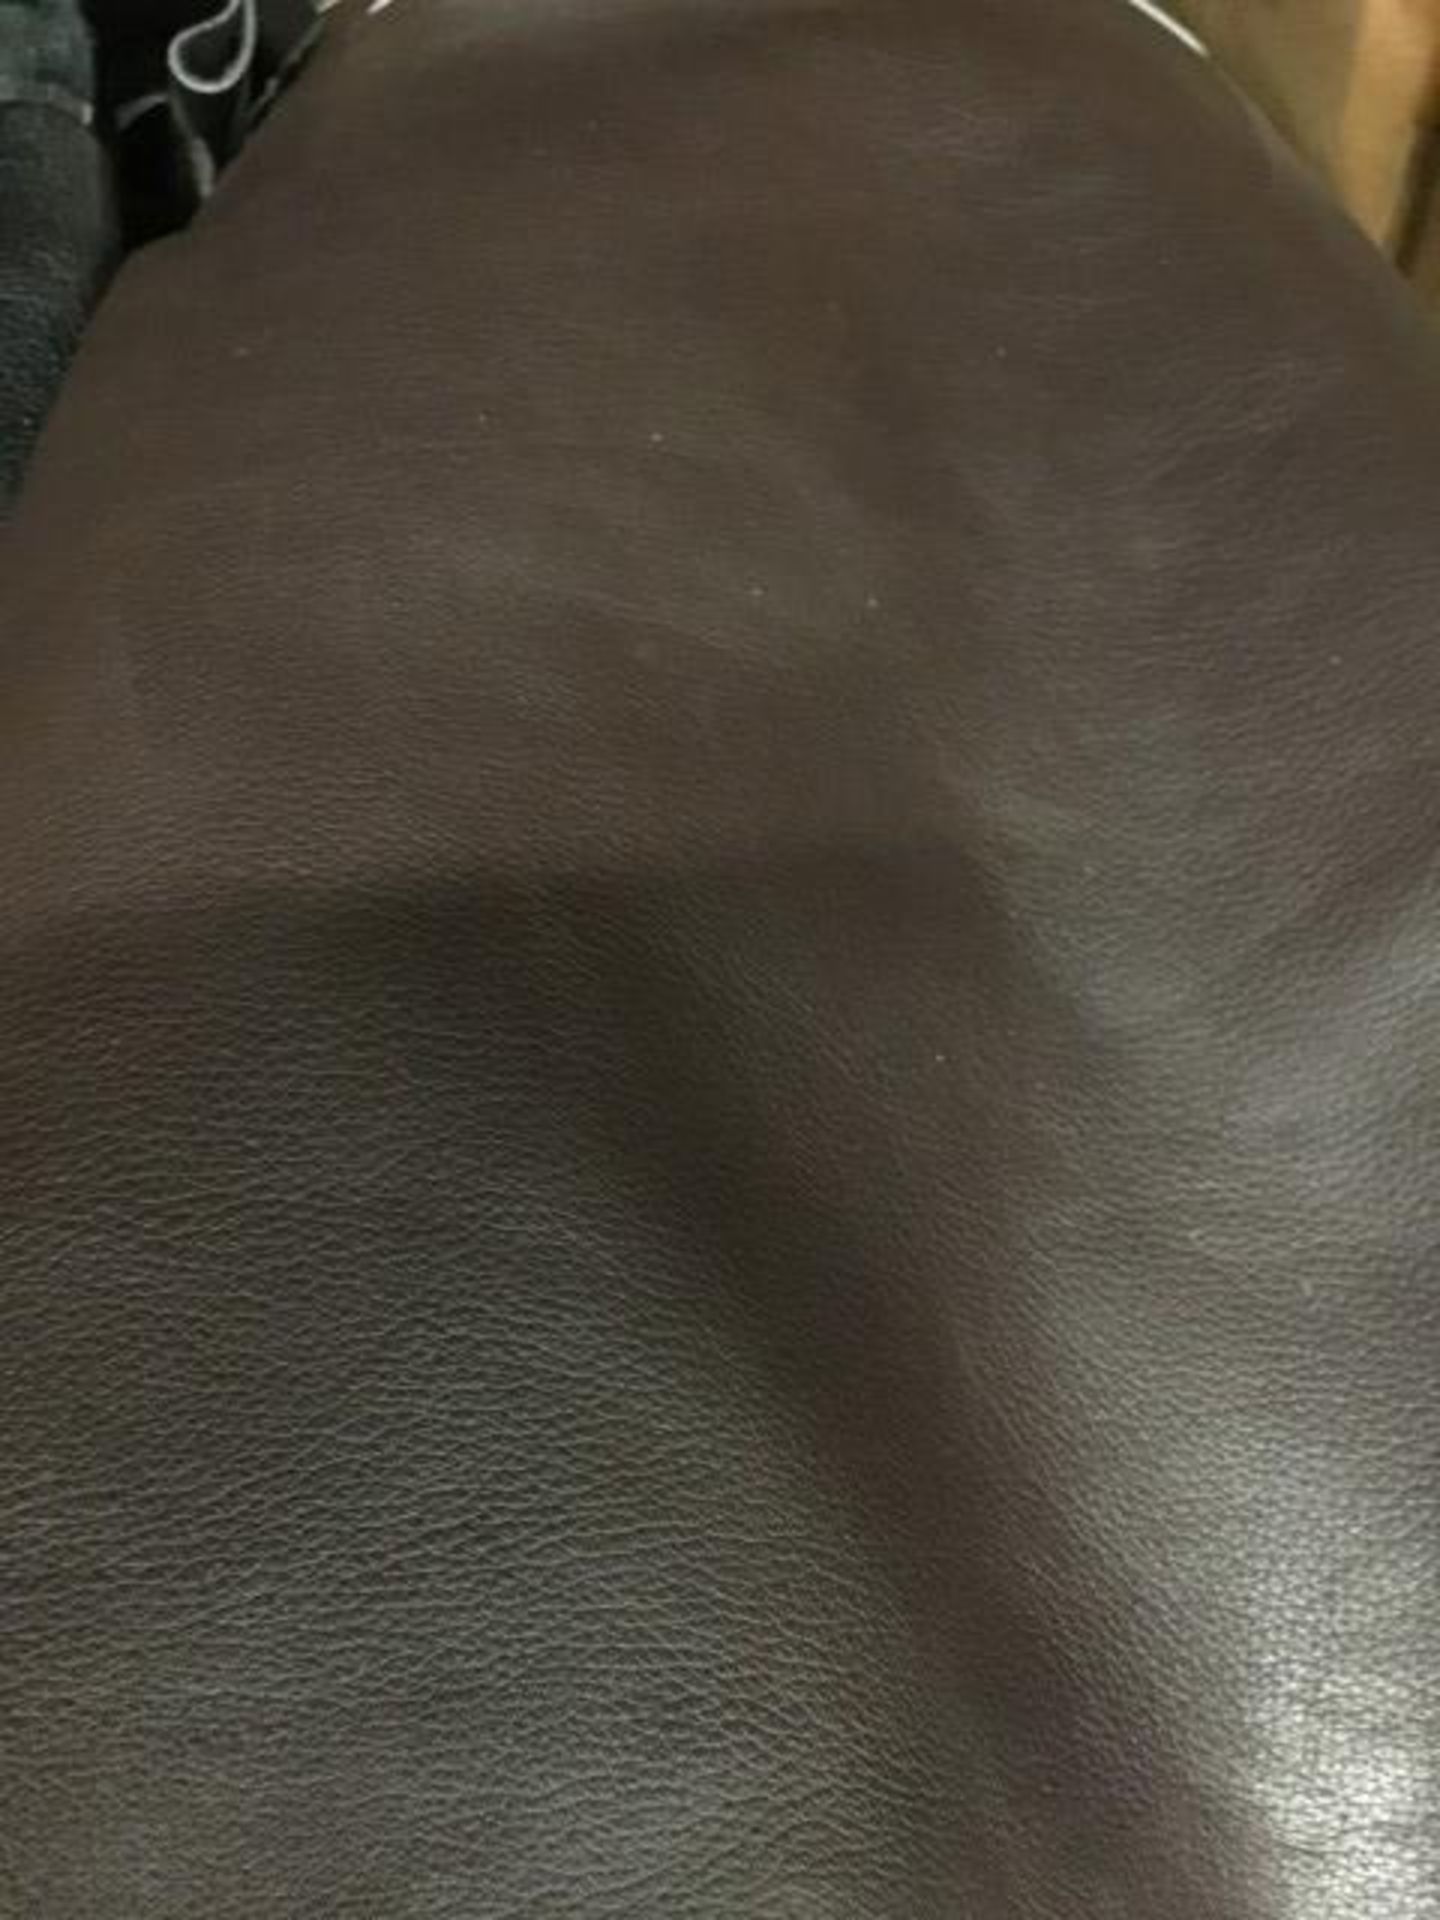 (385) Sq. Ft., 3 Oz. Dark Brown Hair Cell. 4/10 Stand Up Leather Sides